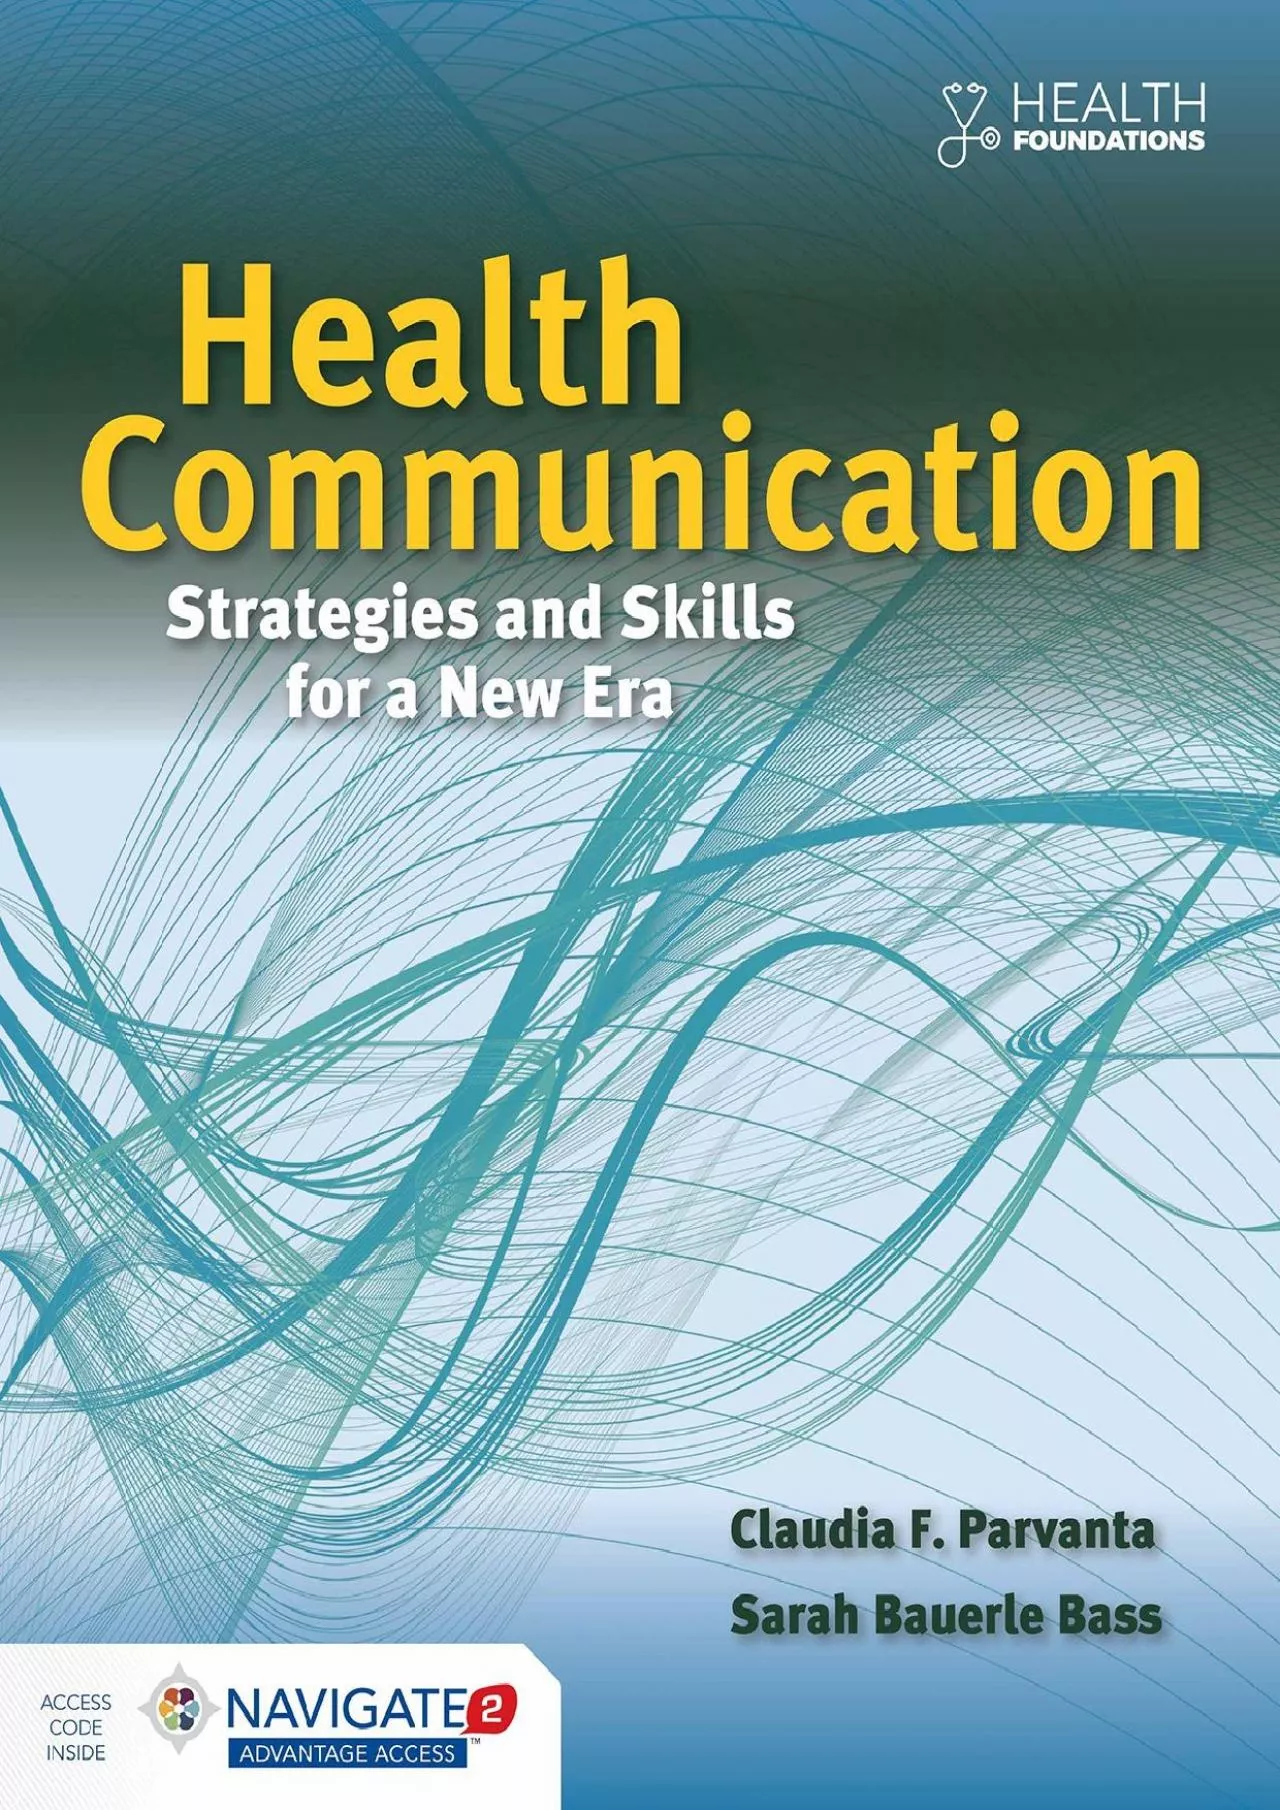 (BOOS)-Health Communication: Strategies and Skills for a New Era: Strategies and Skills